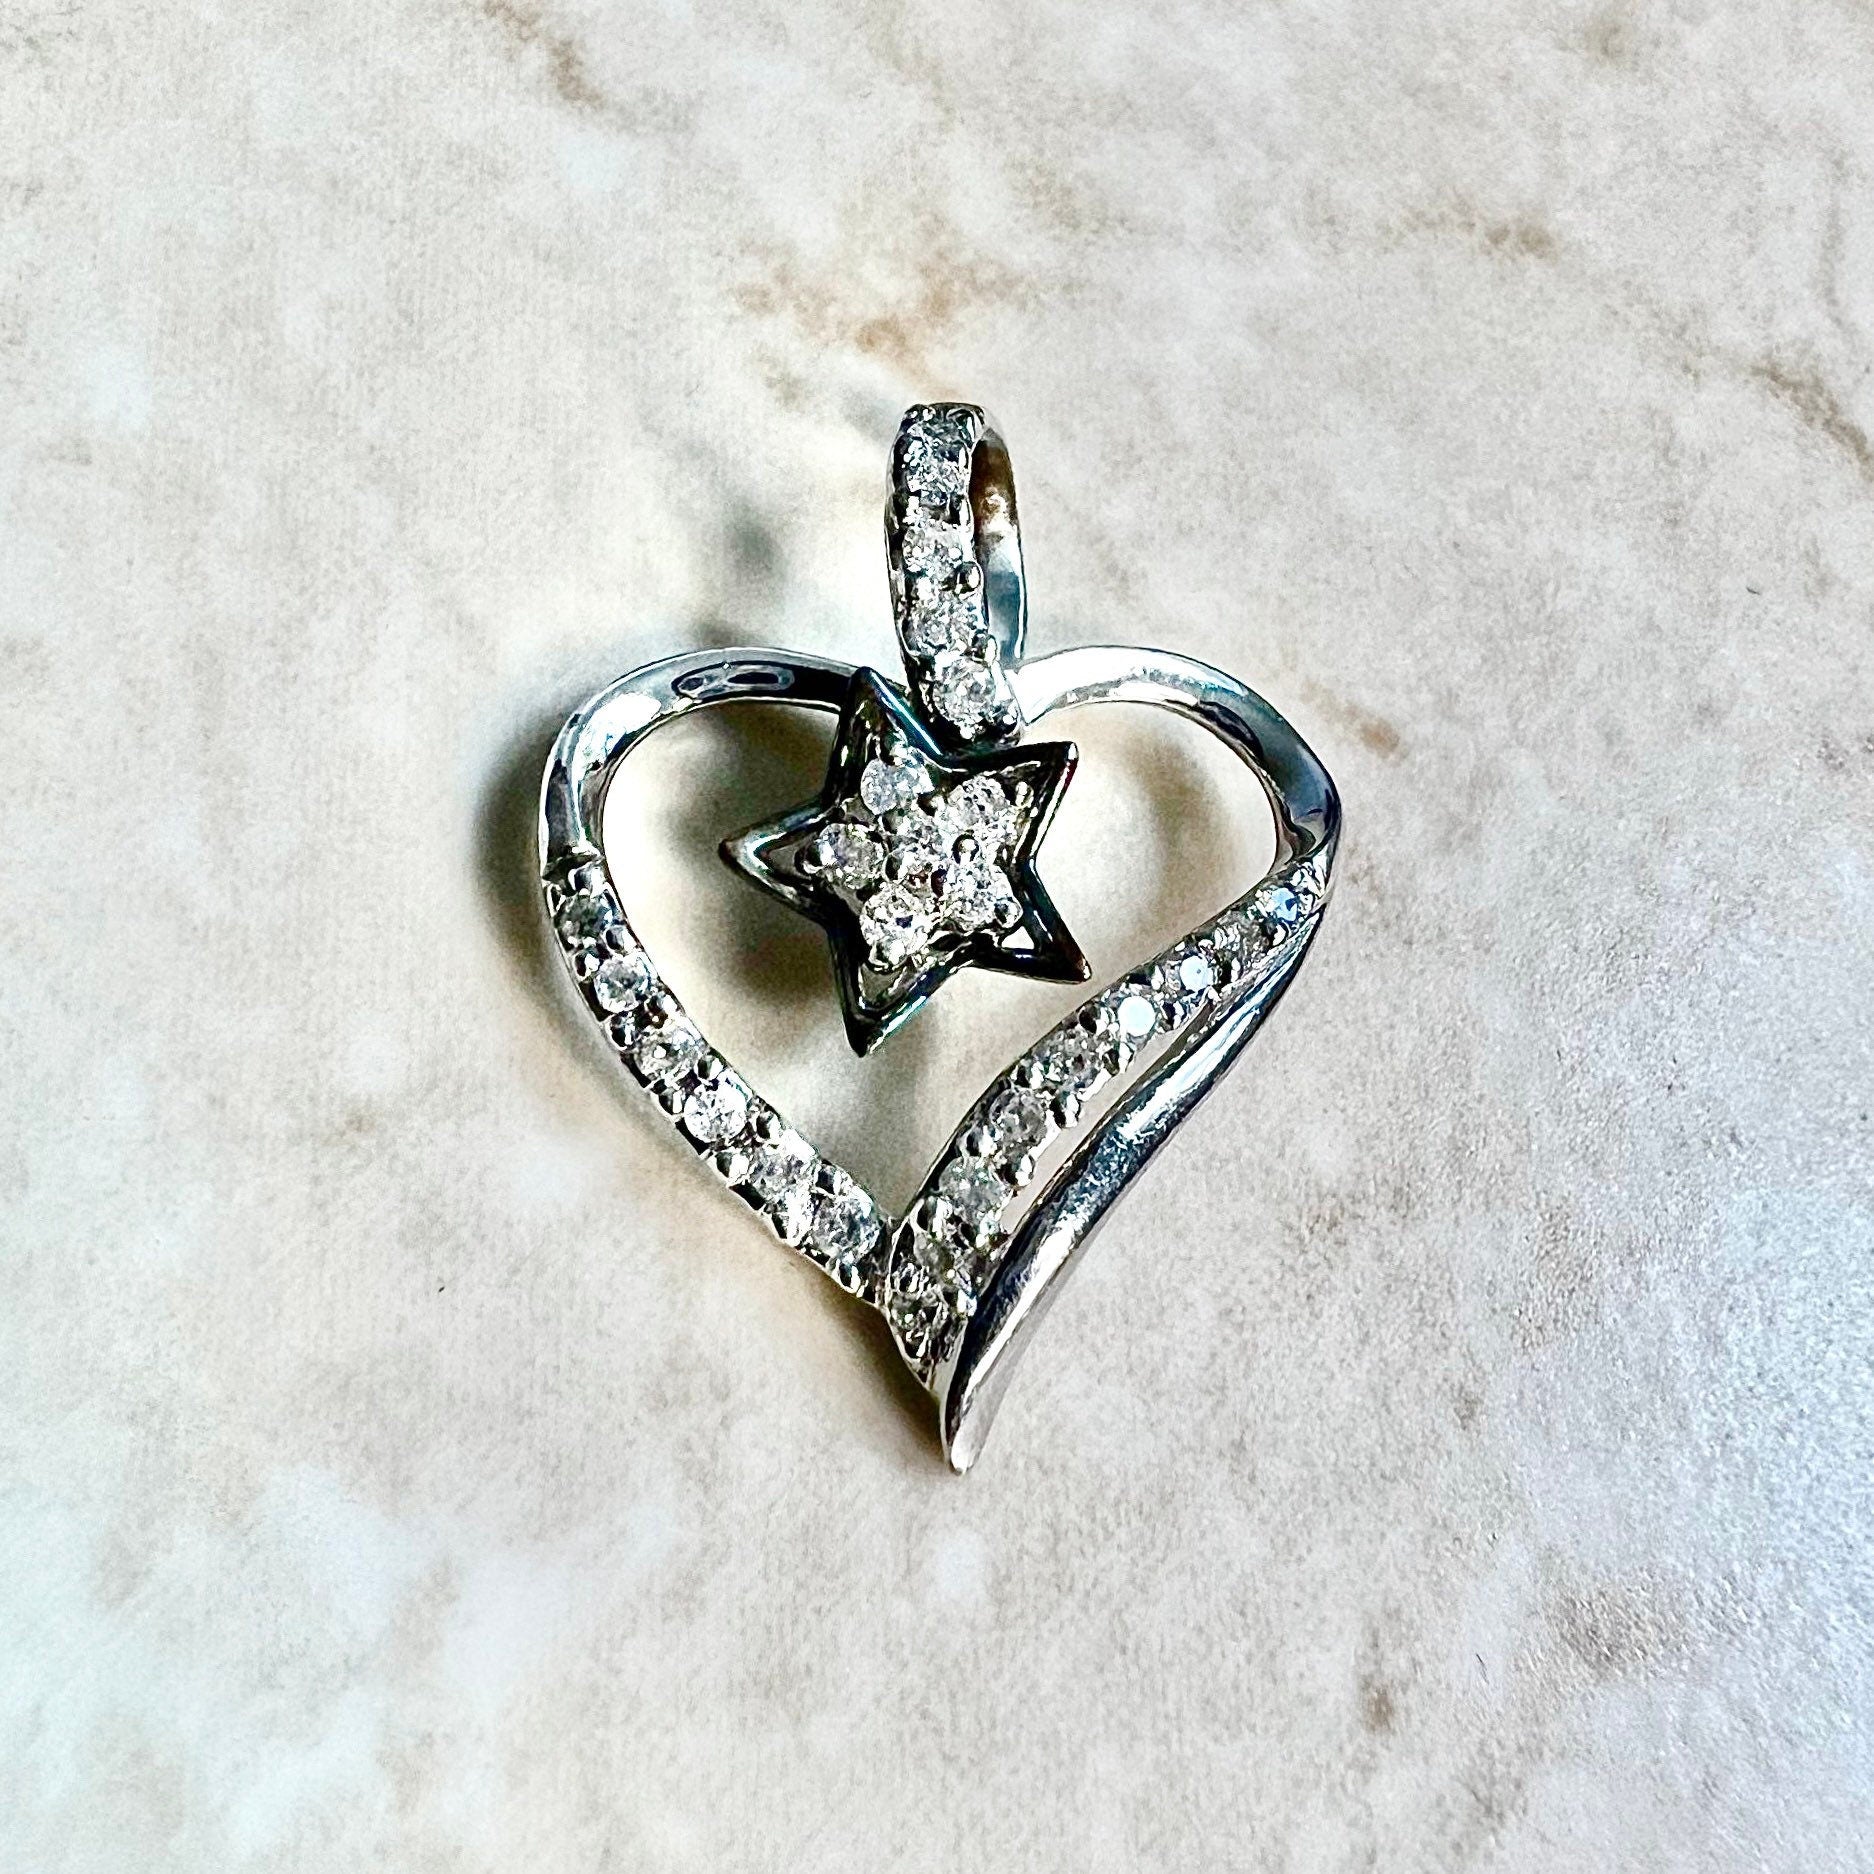 14K Diamond Heart Pendant Necklace - White Gold Diamond Pendant - Gold Heart Necklace - Diamond Star Pendant - Valentine’s Day Gifts For Her